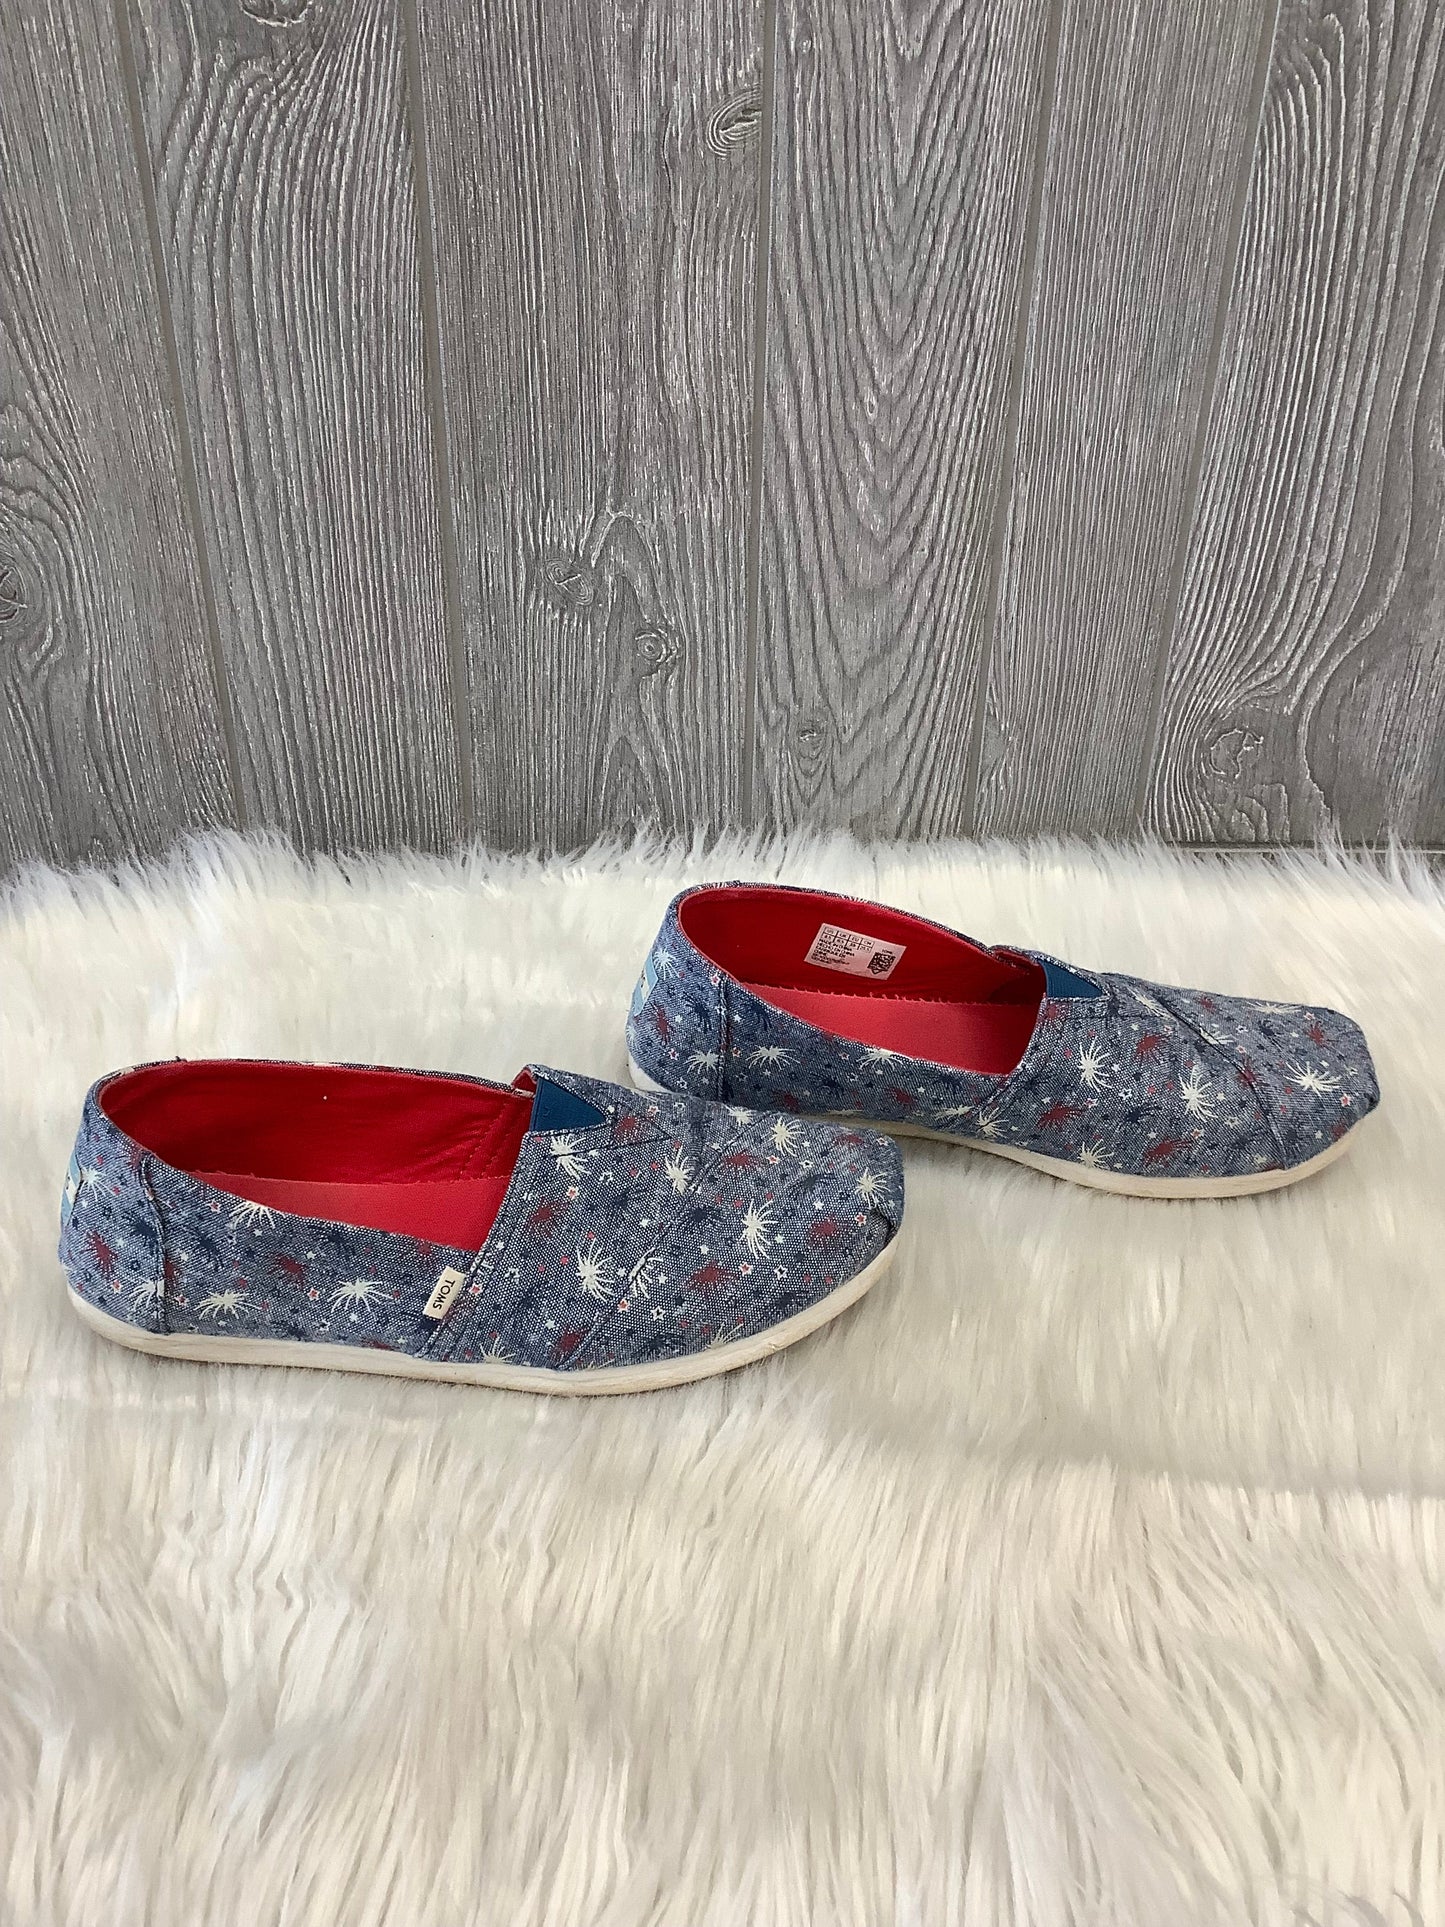 Blue Red & White Shoes Flats Toms, Size 8.5